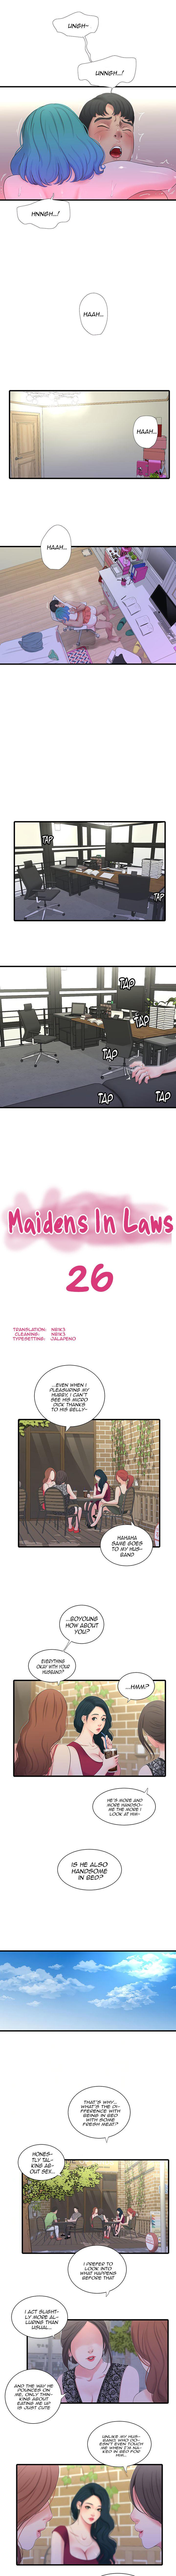 Hot Women Fucking Maidens In-Law | One's In-Laws Virgins Ch. 26-30 [English] Gay Pawnshop - Page 2